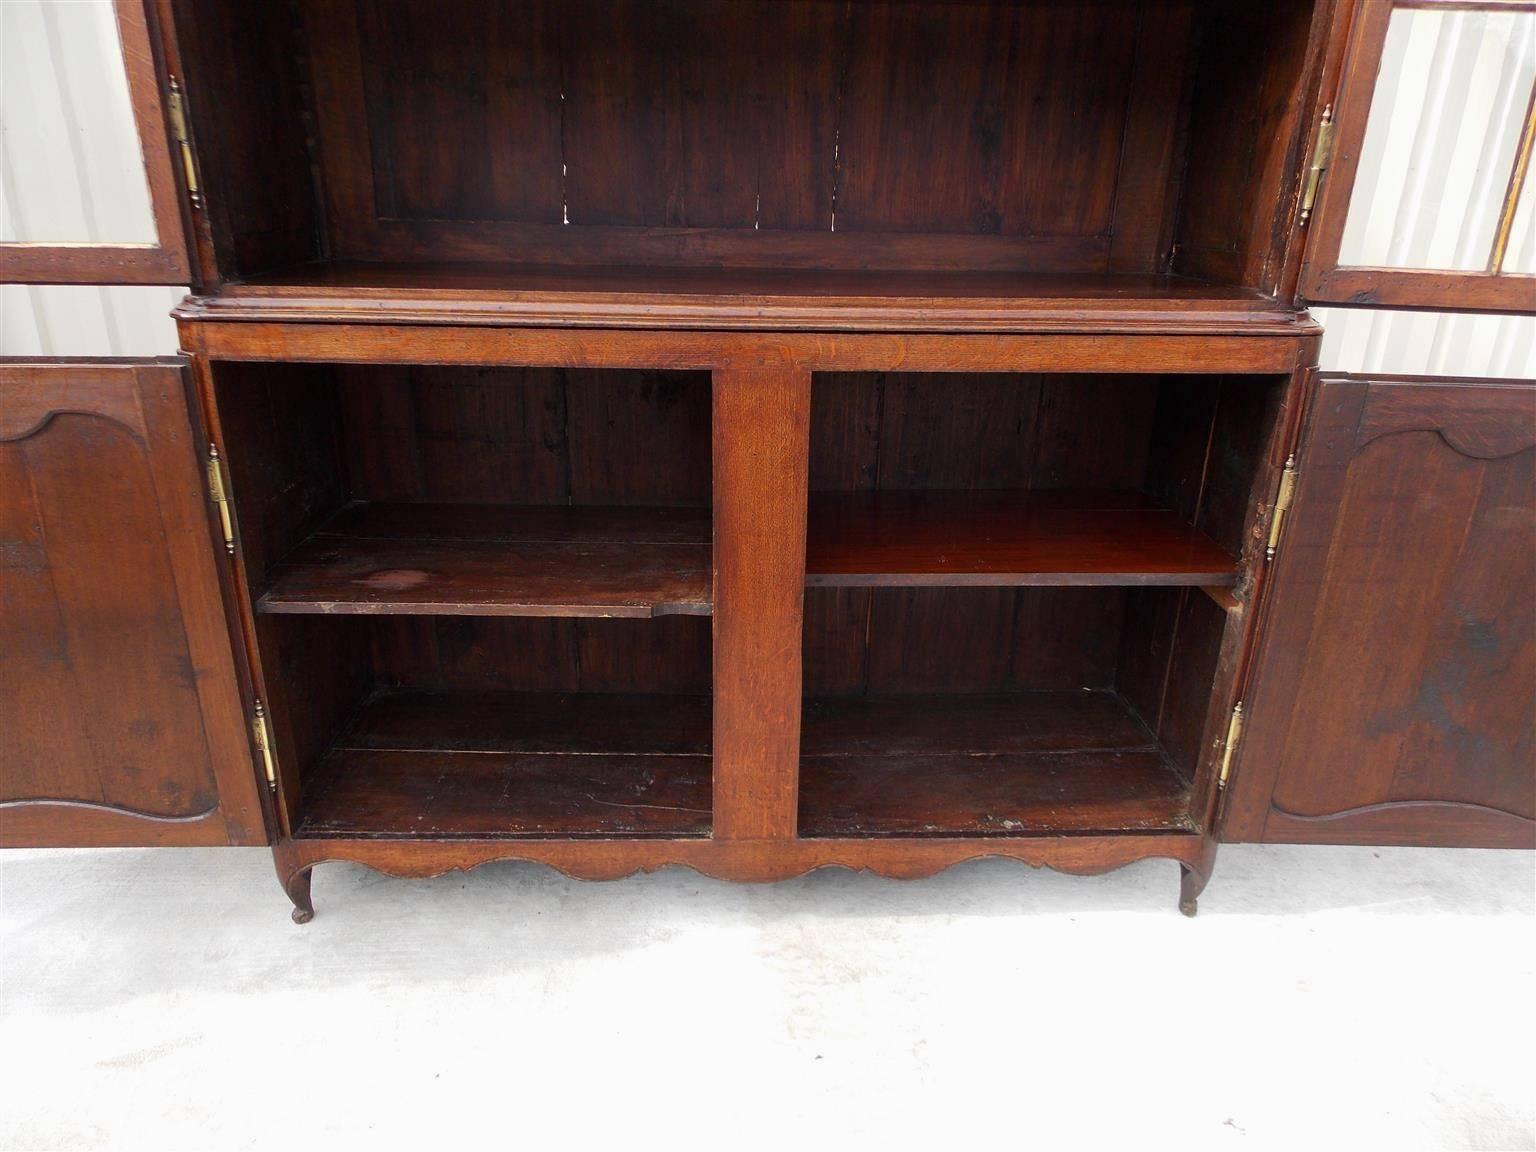 French Provincial Walnut Flanking Glass & Cabinet Arched Dome Cupboard, C. 1780 For Sale 1